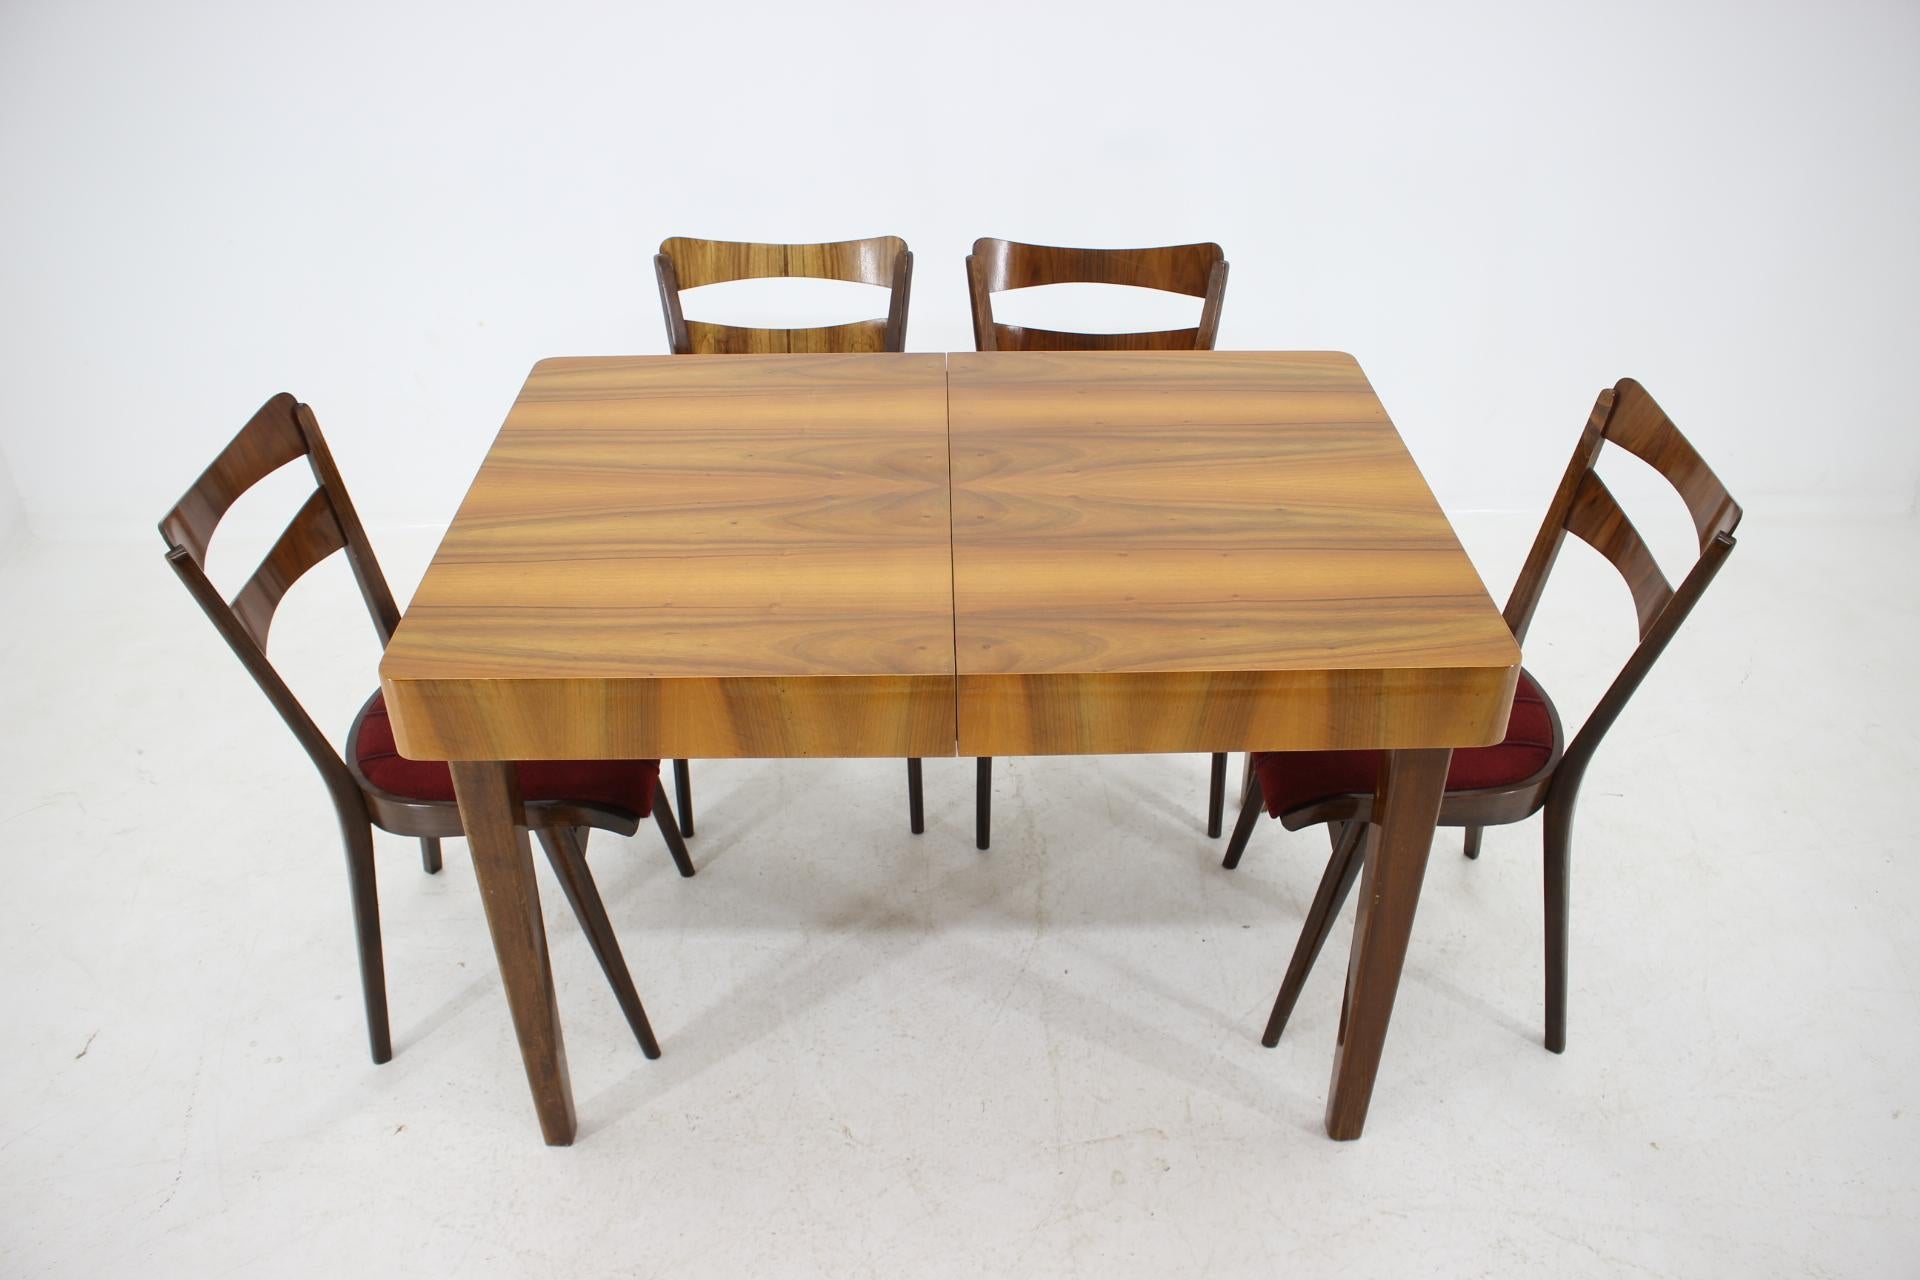 4 x chair and 1x extendable dining table. Good original condition with minor signs of use. The table dimensions are: H 77 cm, W 115 - 173 cm, D 80 cm.